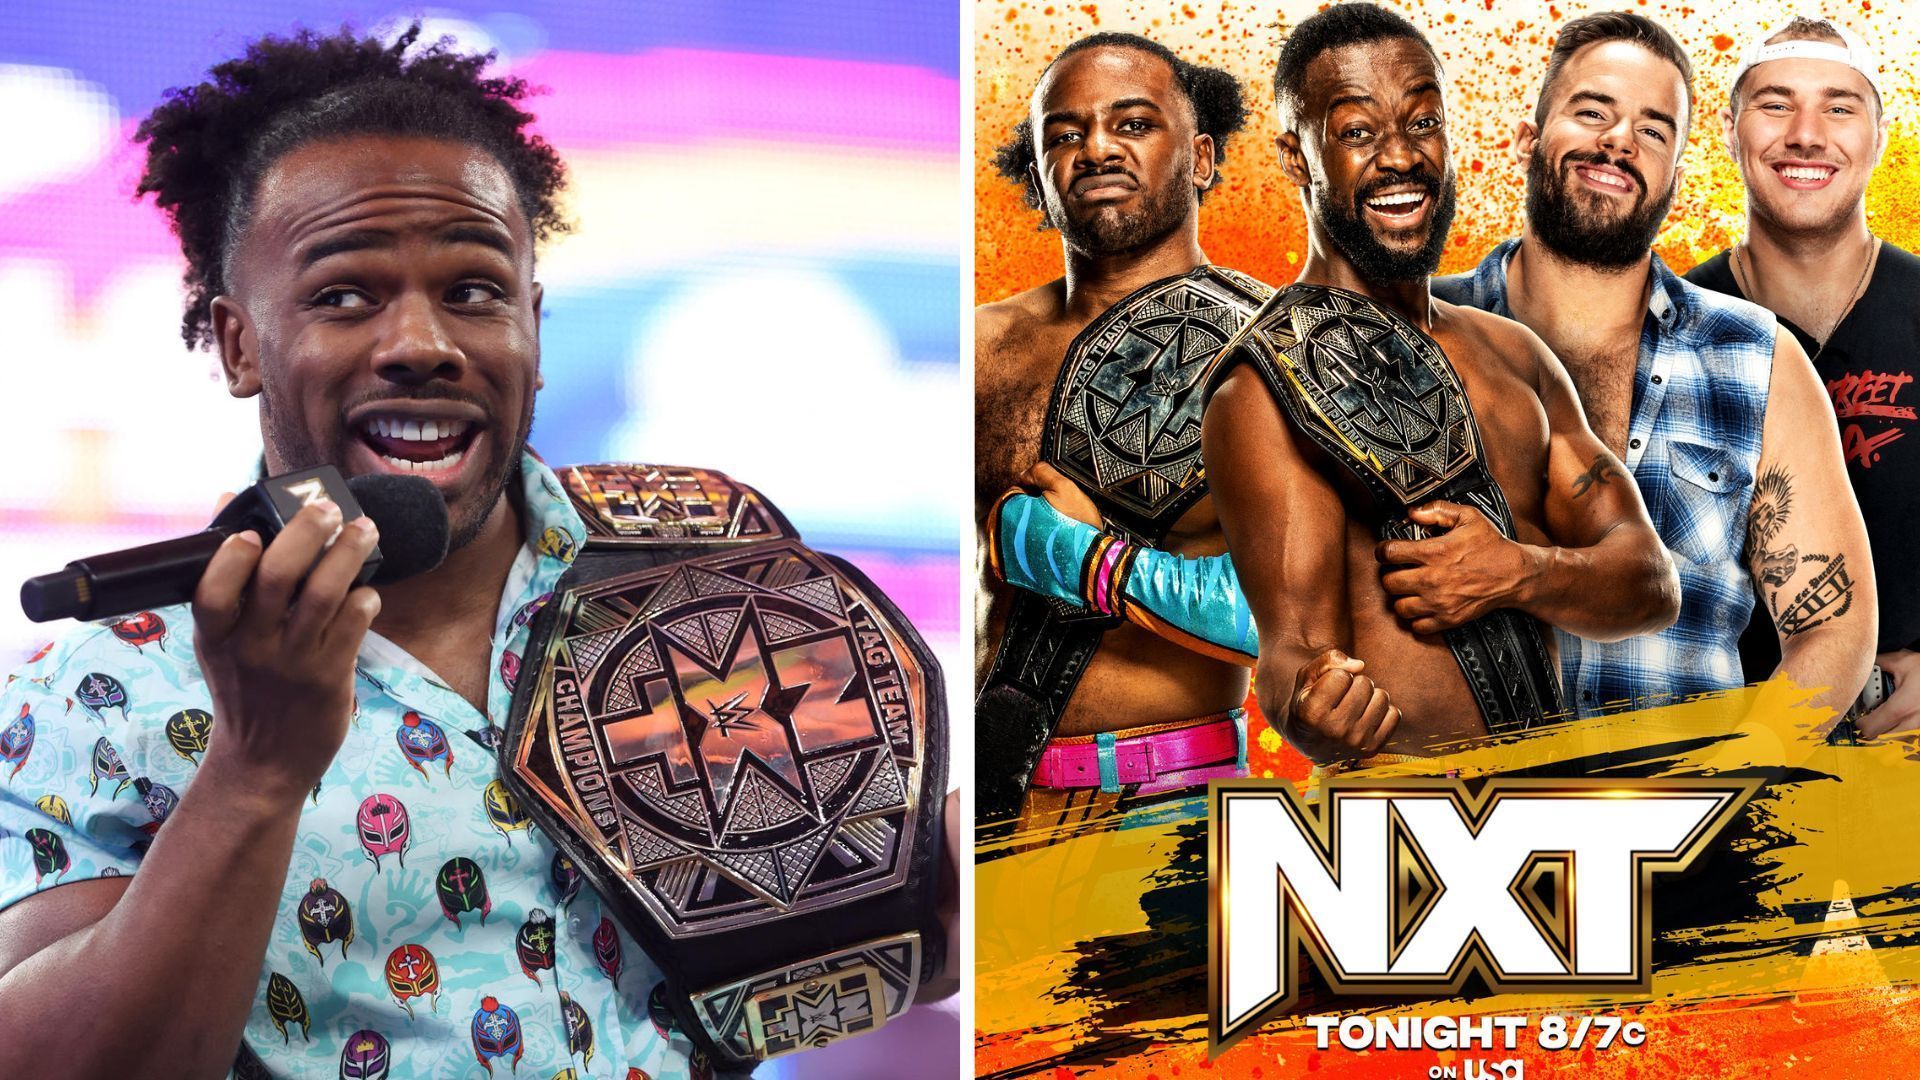 New Day will defend the NXT Tag Team Championships tonight